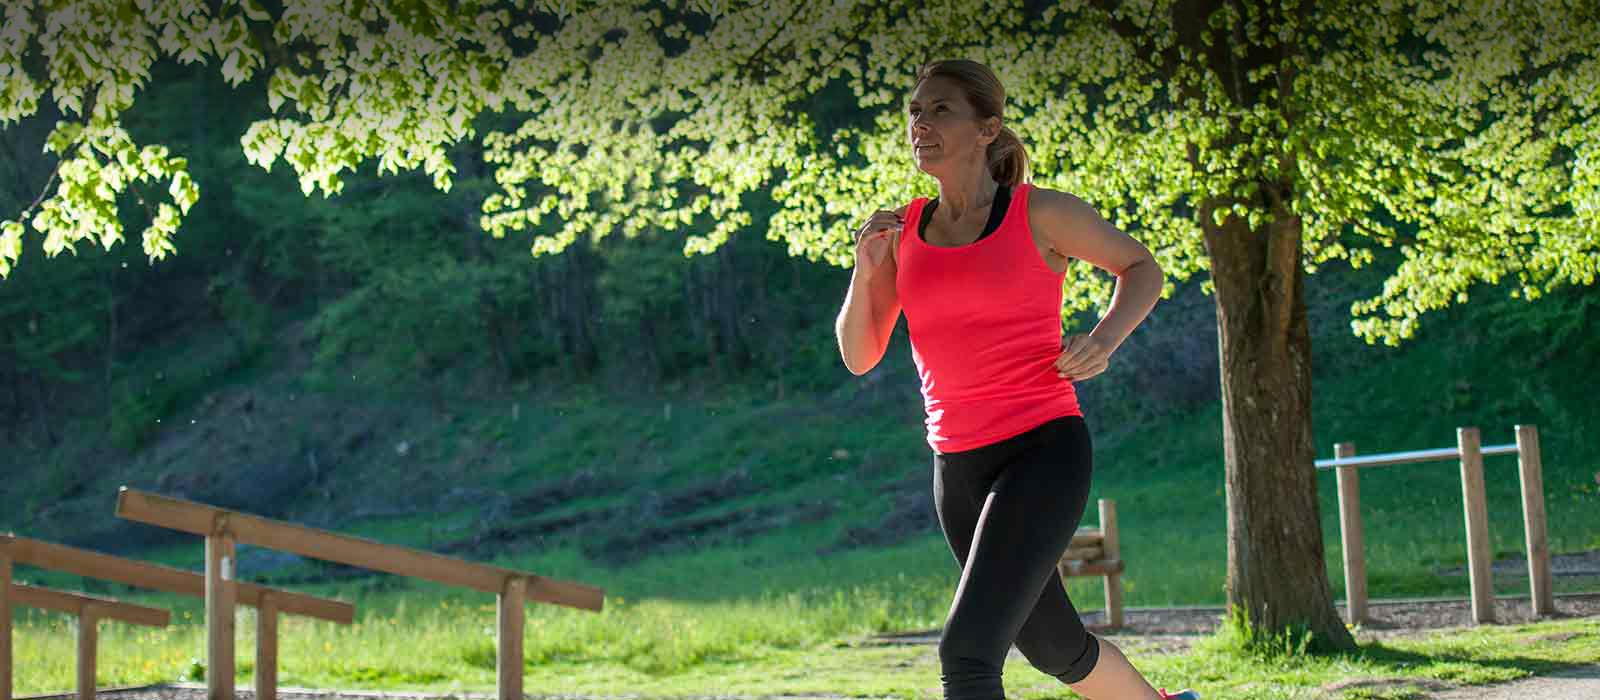 middle aged woman jogging outdoors